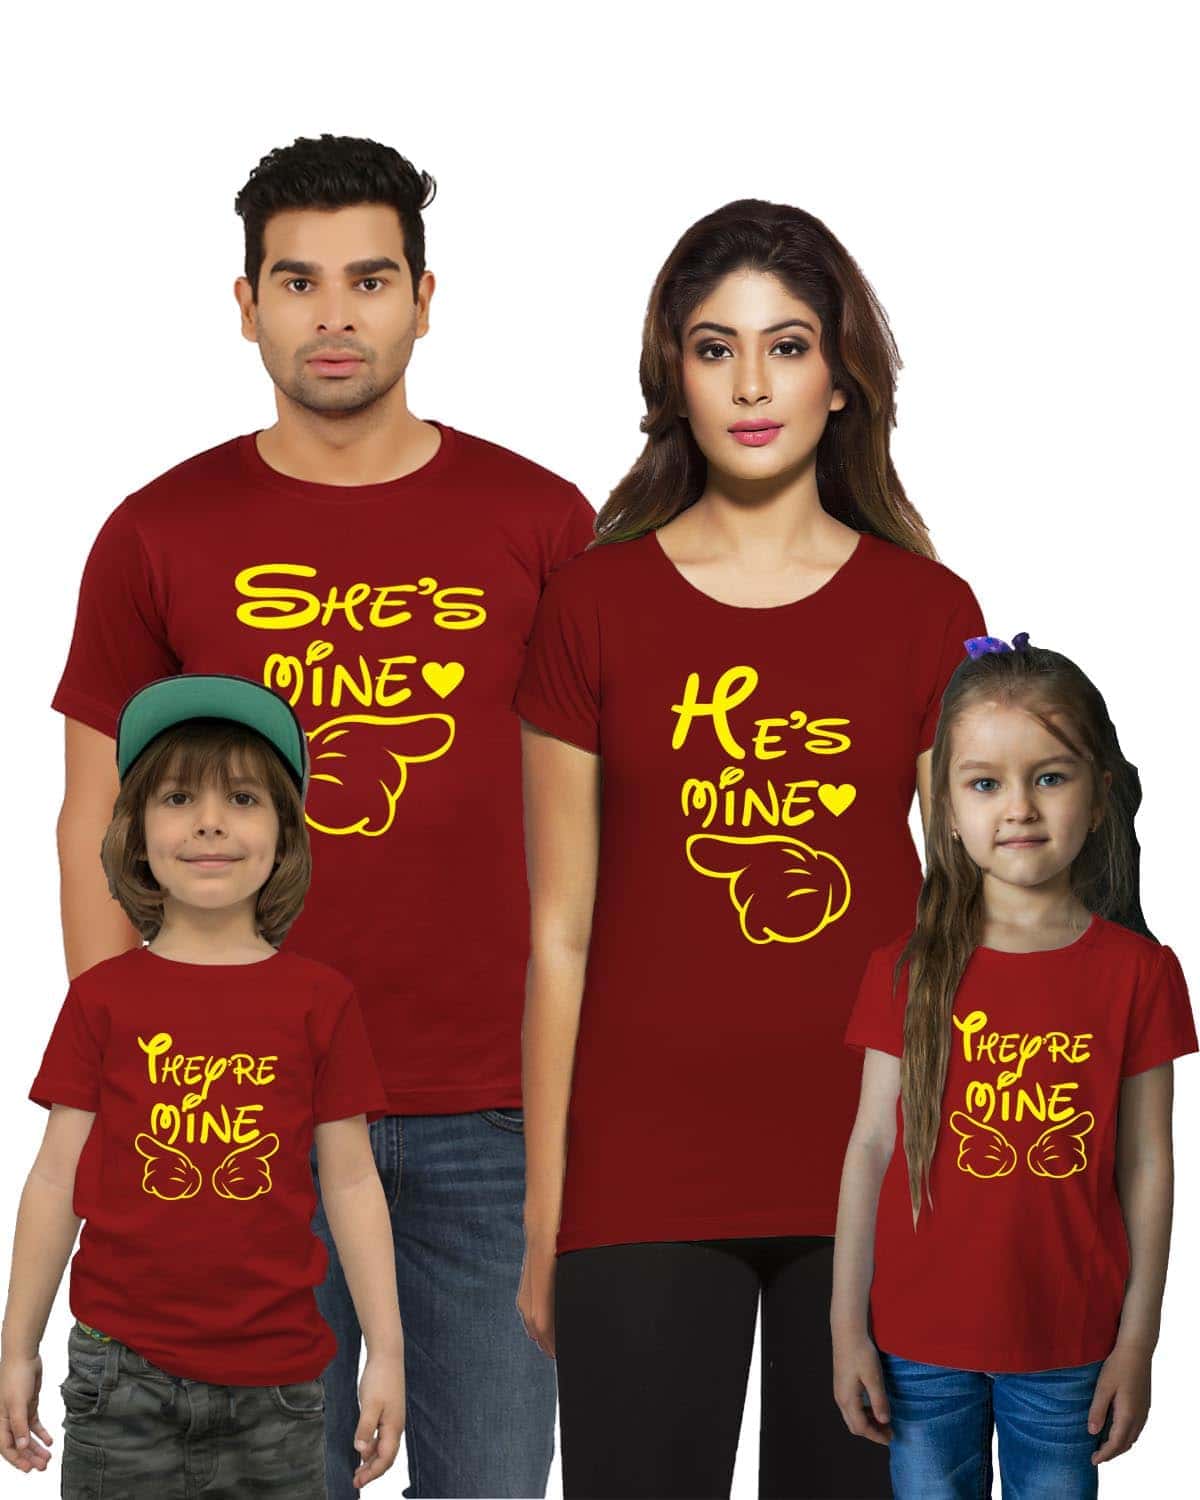 King Queen Prince Princess Family Matching T-Shirts